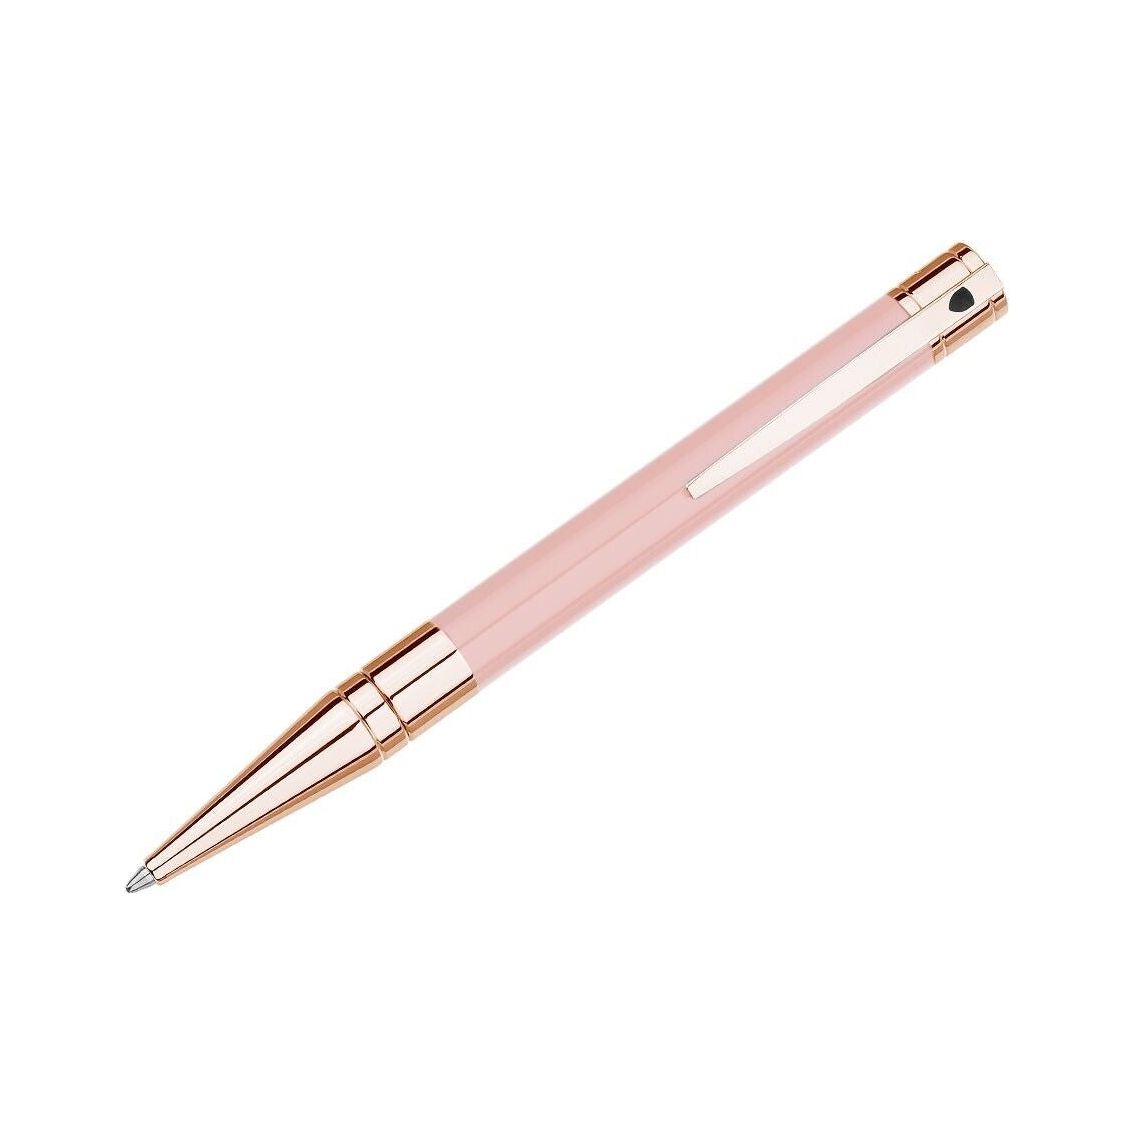 DUPONT WRITING PENNE S-T- DUPONT MOD. 265278 FASHION ACCESSORIES penne-s-t-dupont-mod-265278 265278.jpg